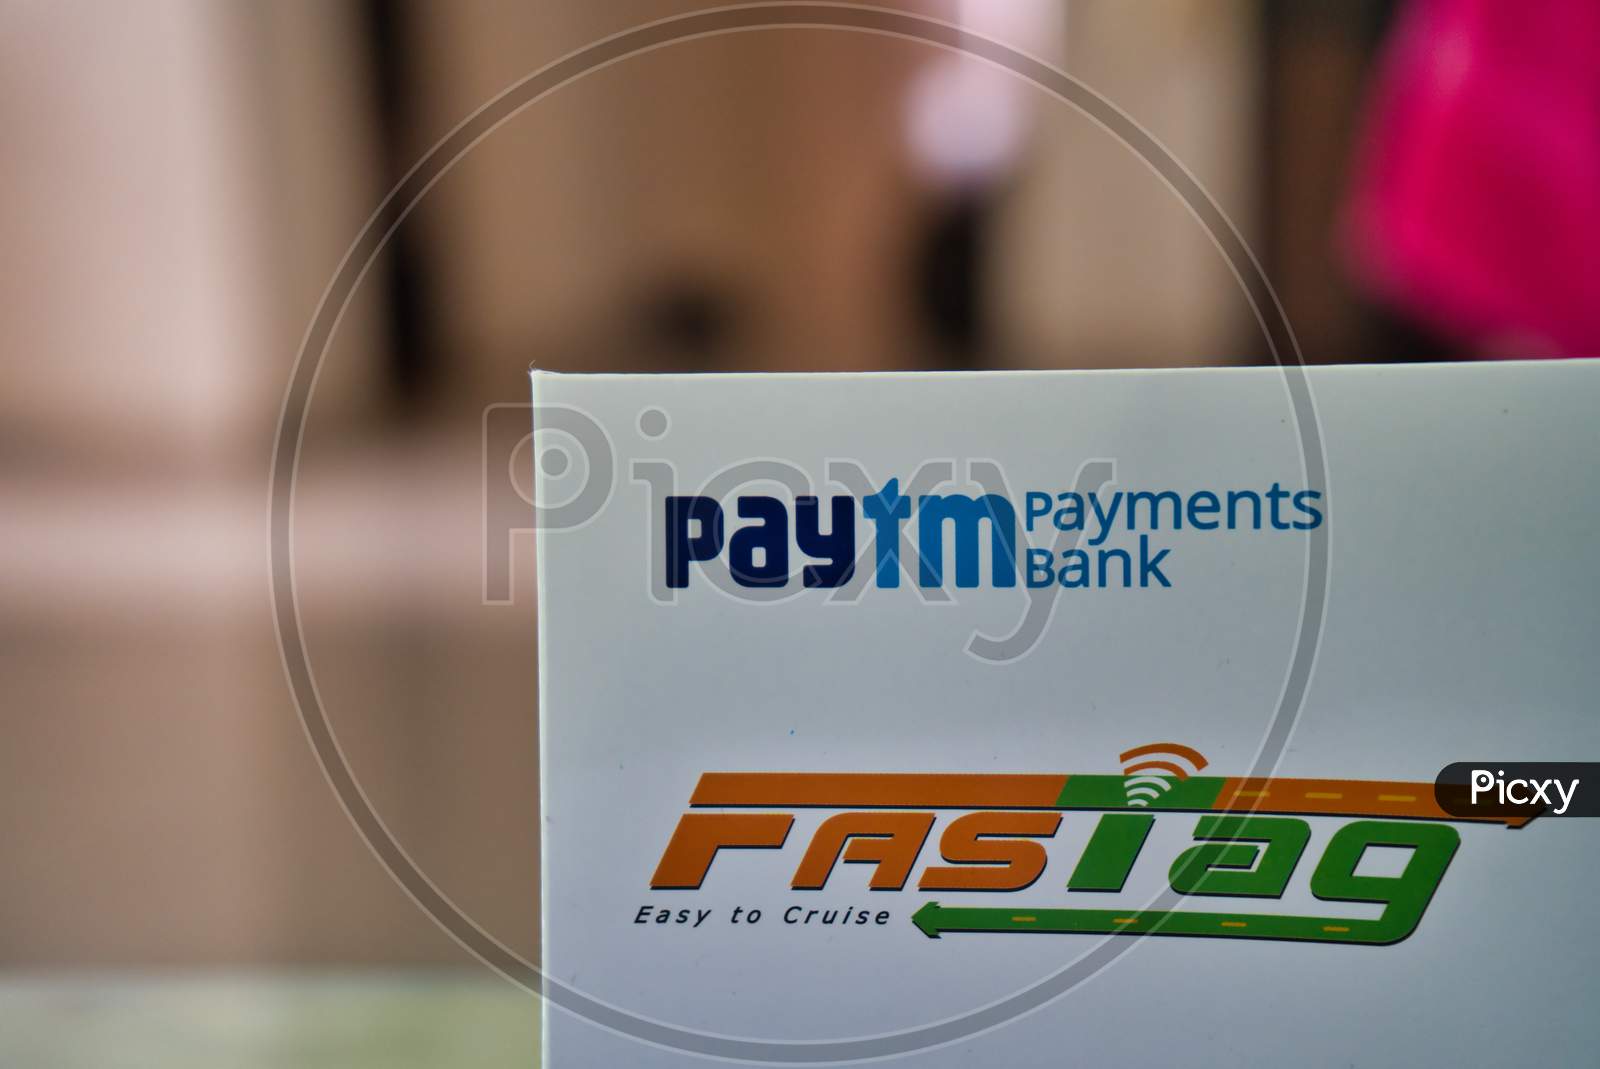 Fast Tag Provided By Paytm Payment Bank.